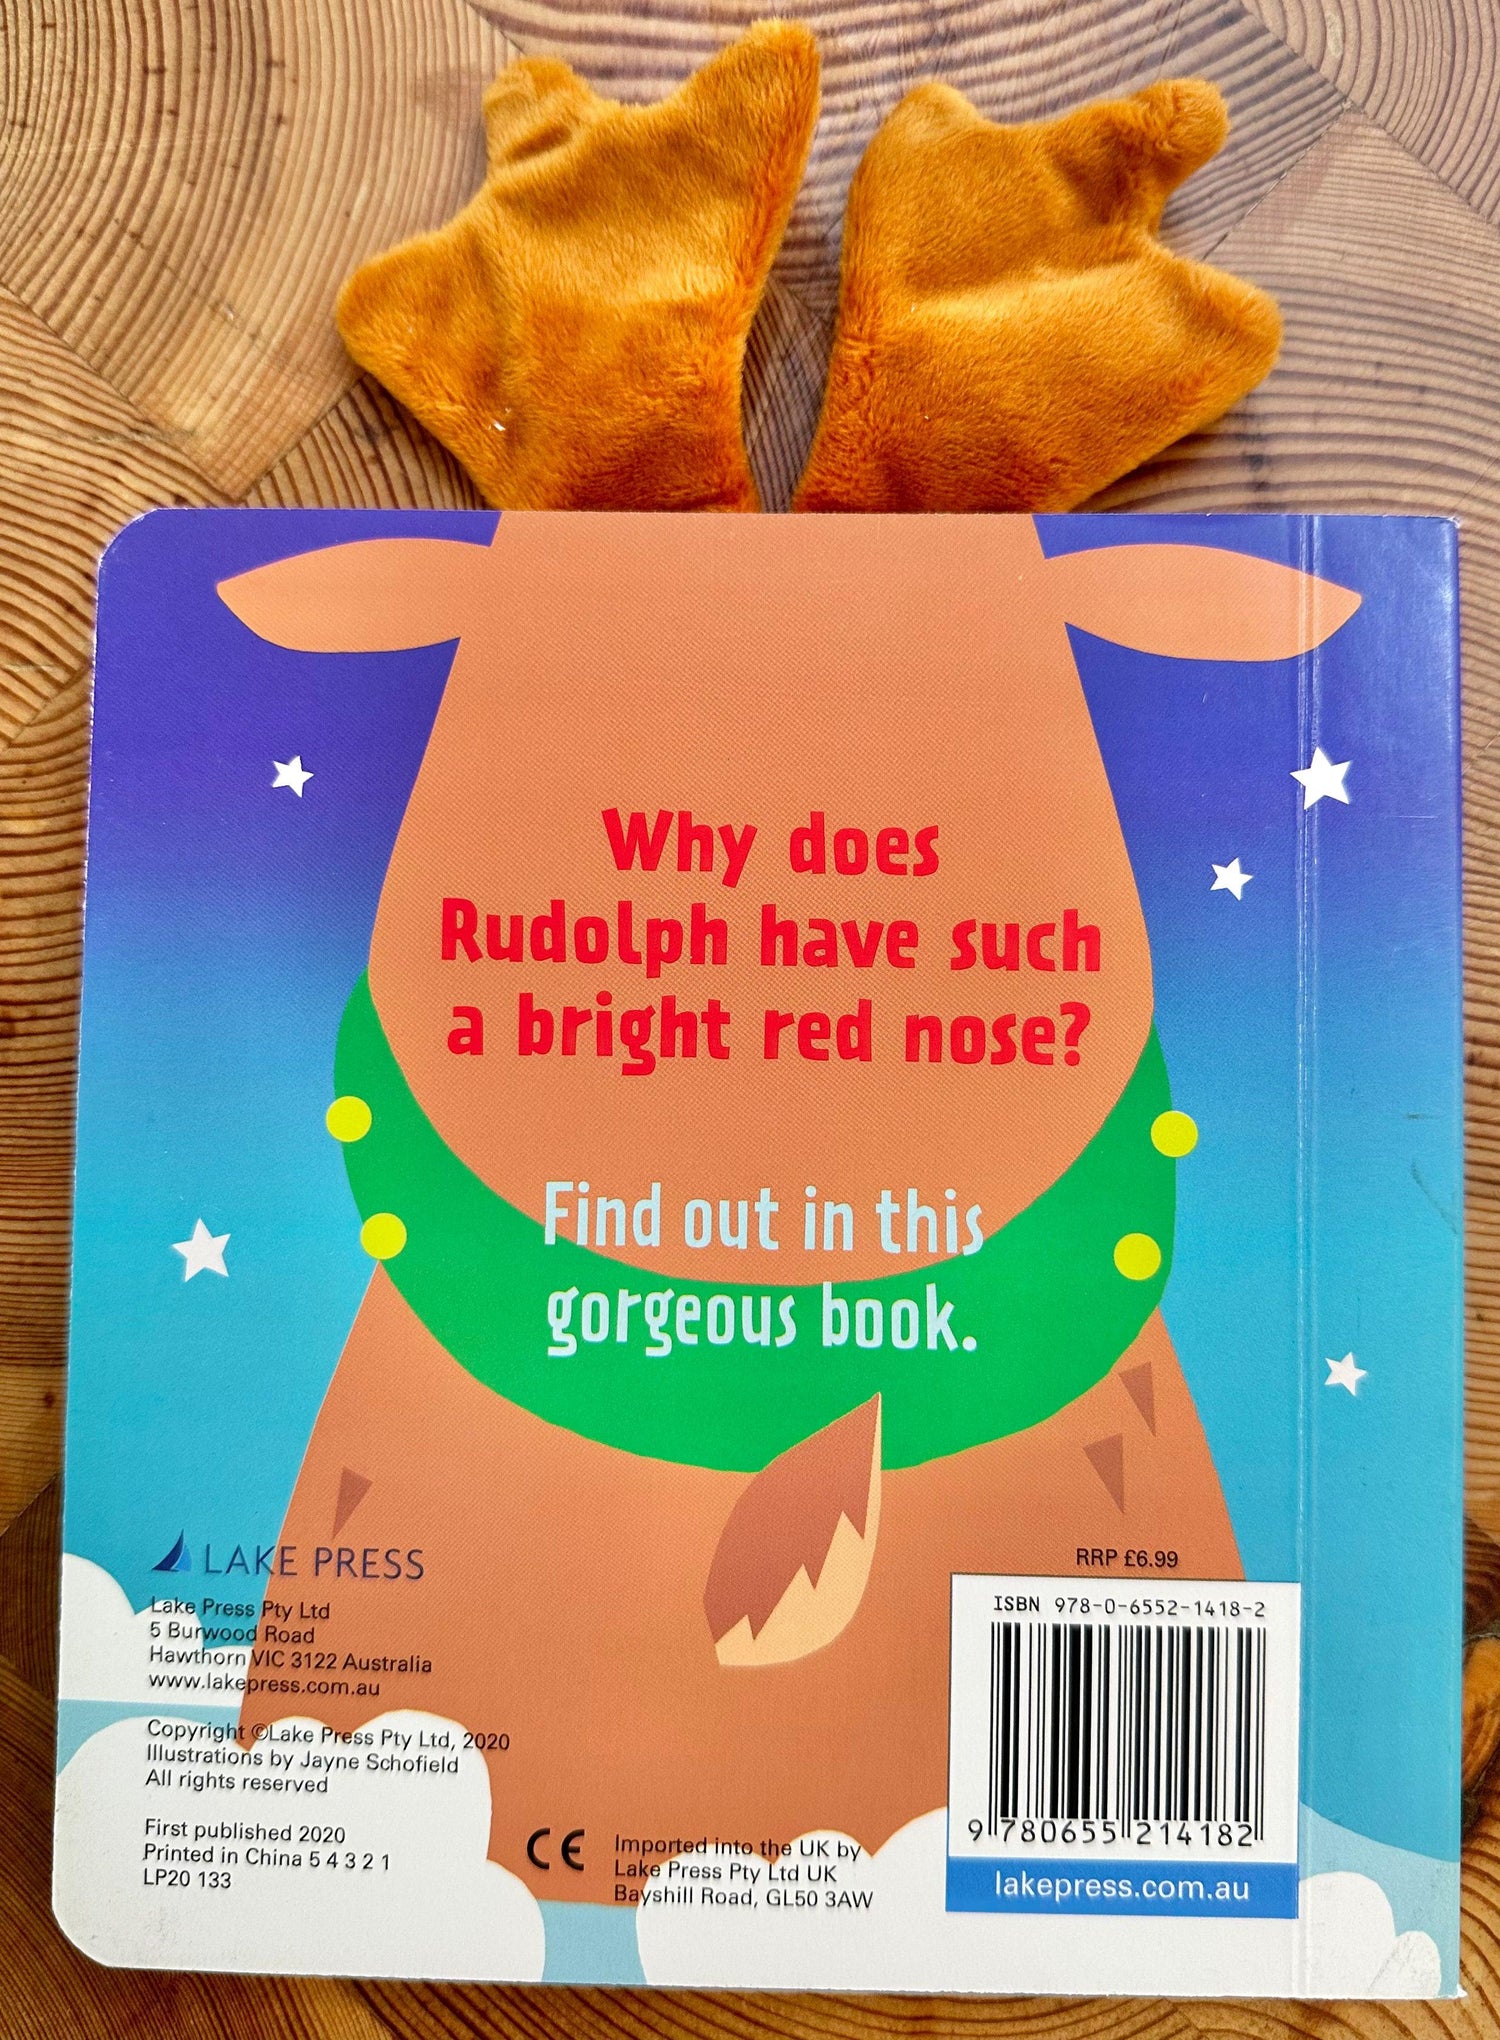 Why does Rudolph have a red nose?